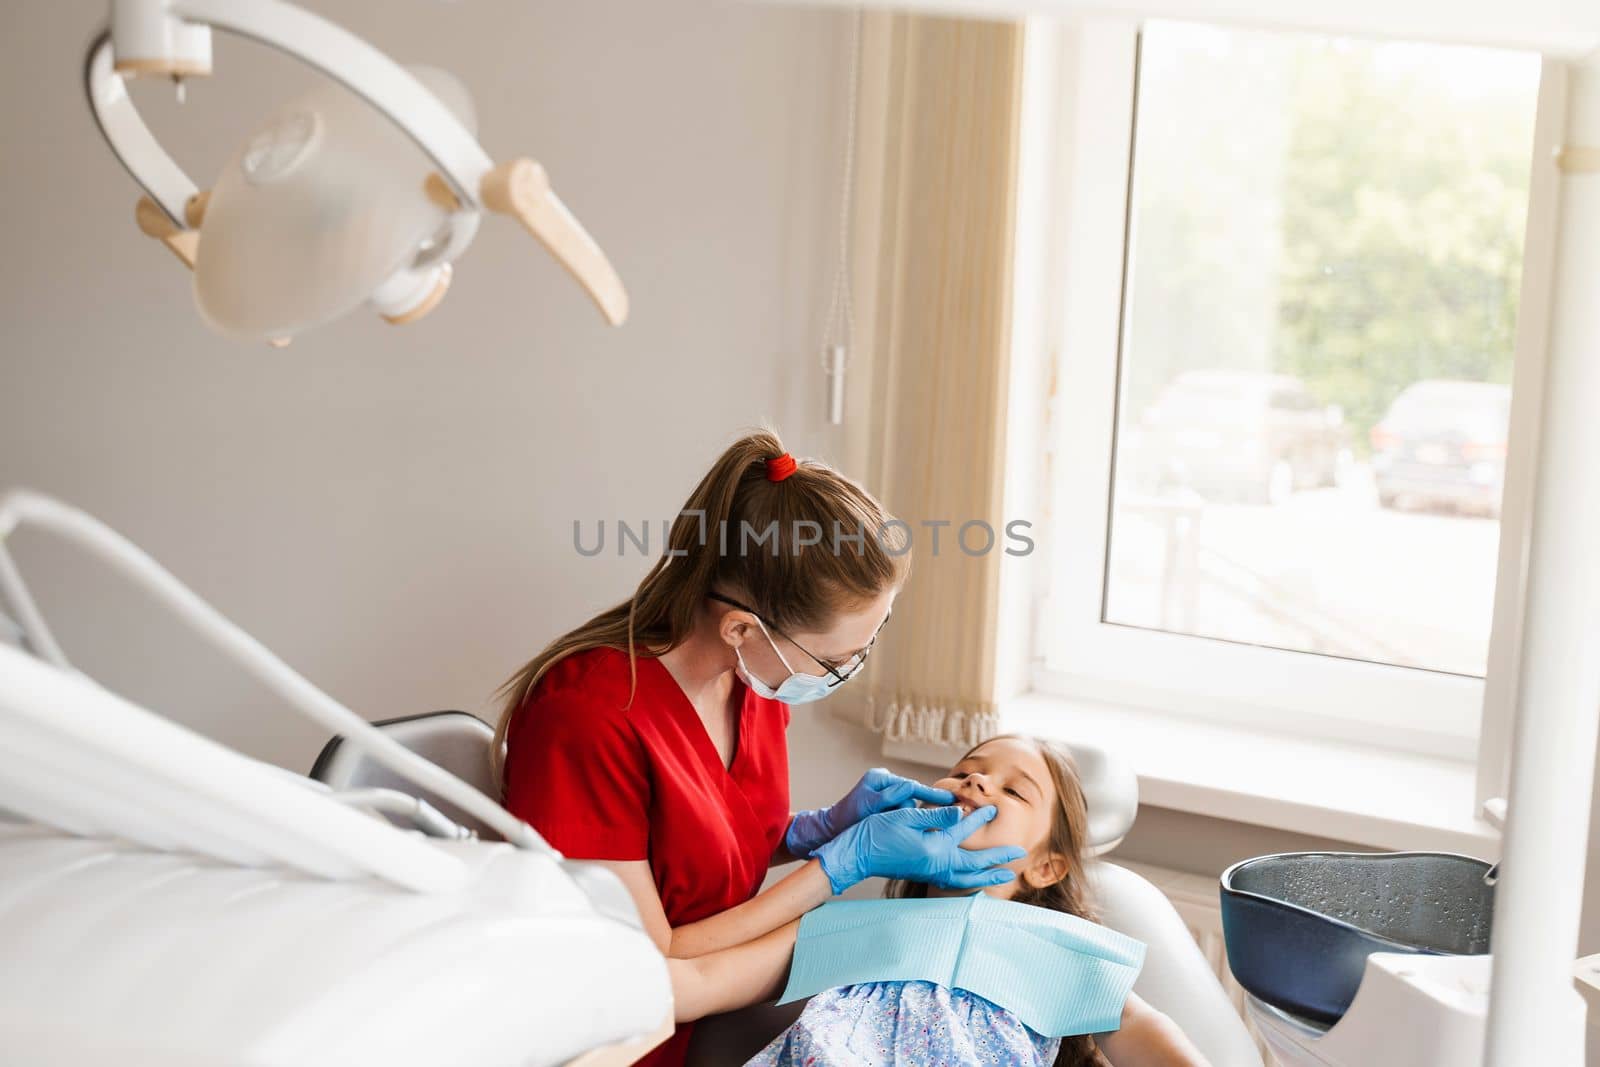 Consultation with child dentist at dentistry. Teeth treatment. Children dentist examines girl mouth and teeth and treats toothaches. Happy child patient of dentistry